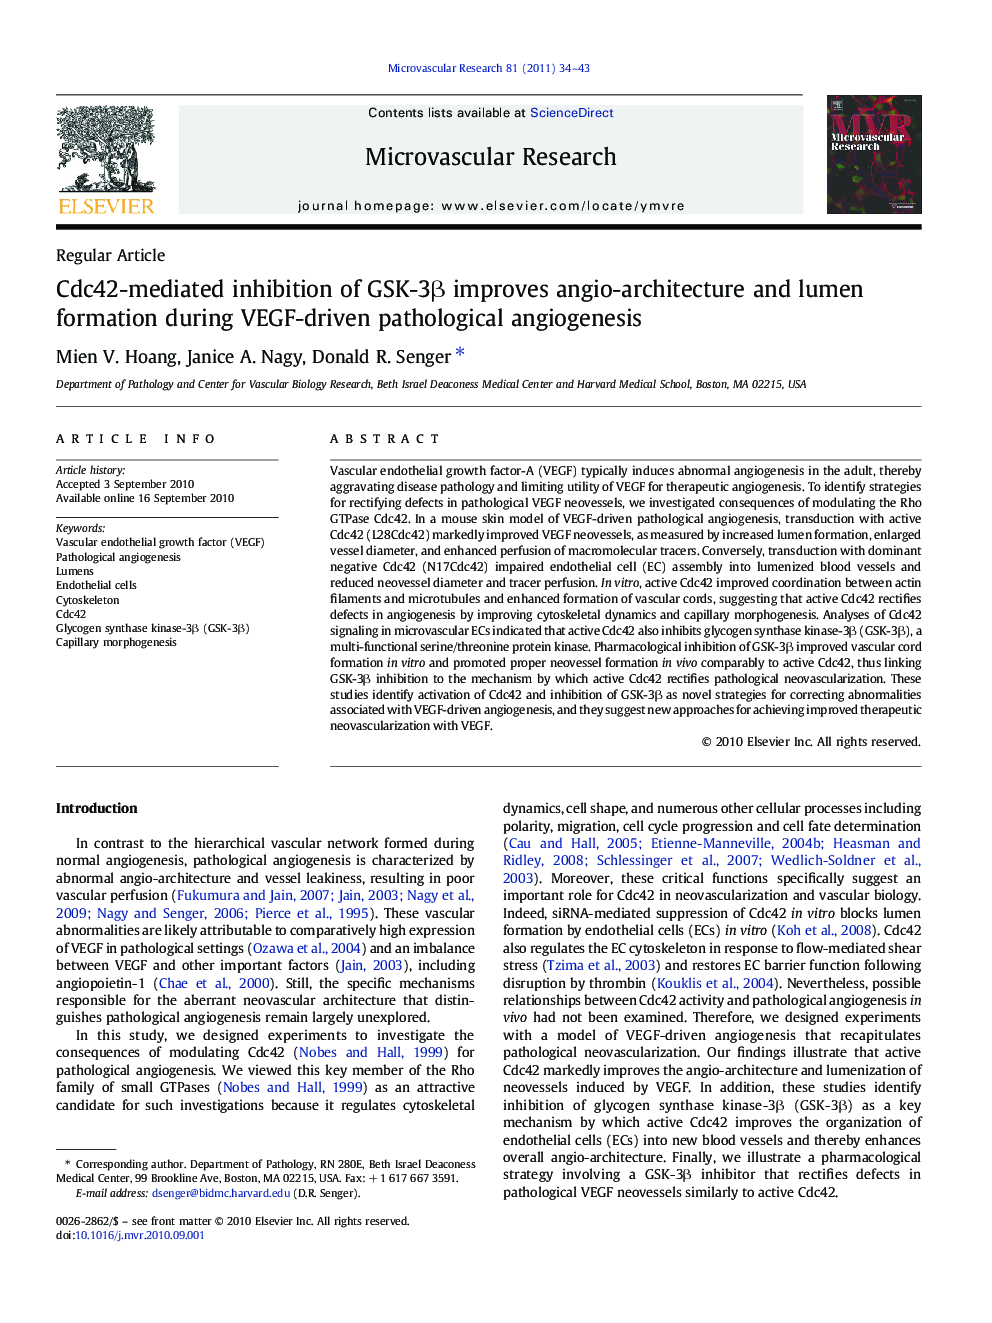 Cdc42-mediated inhibition of GSK-3β improves angio-architecture and lumen formation during VEGF-driven pathological angiogenesis